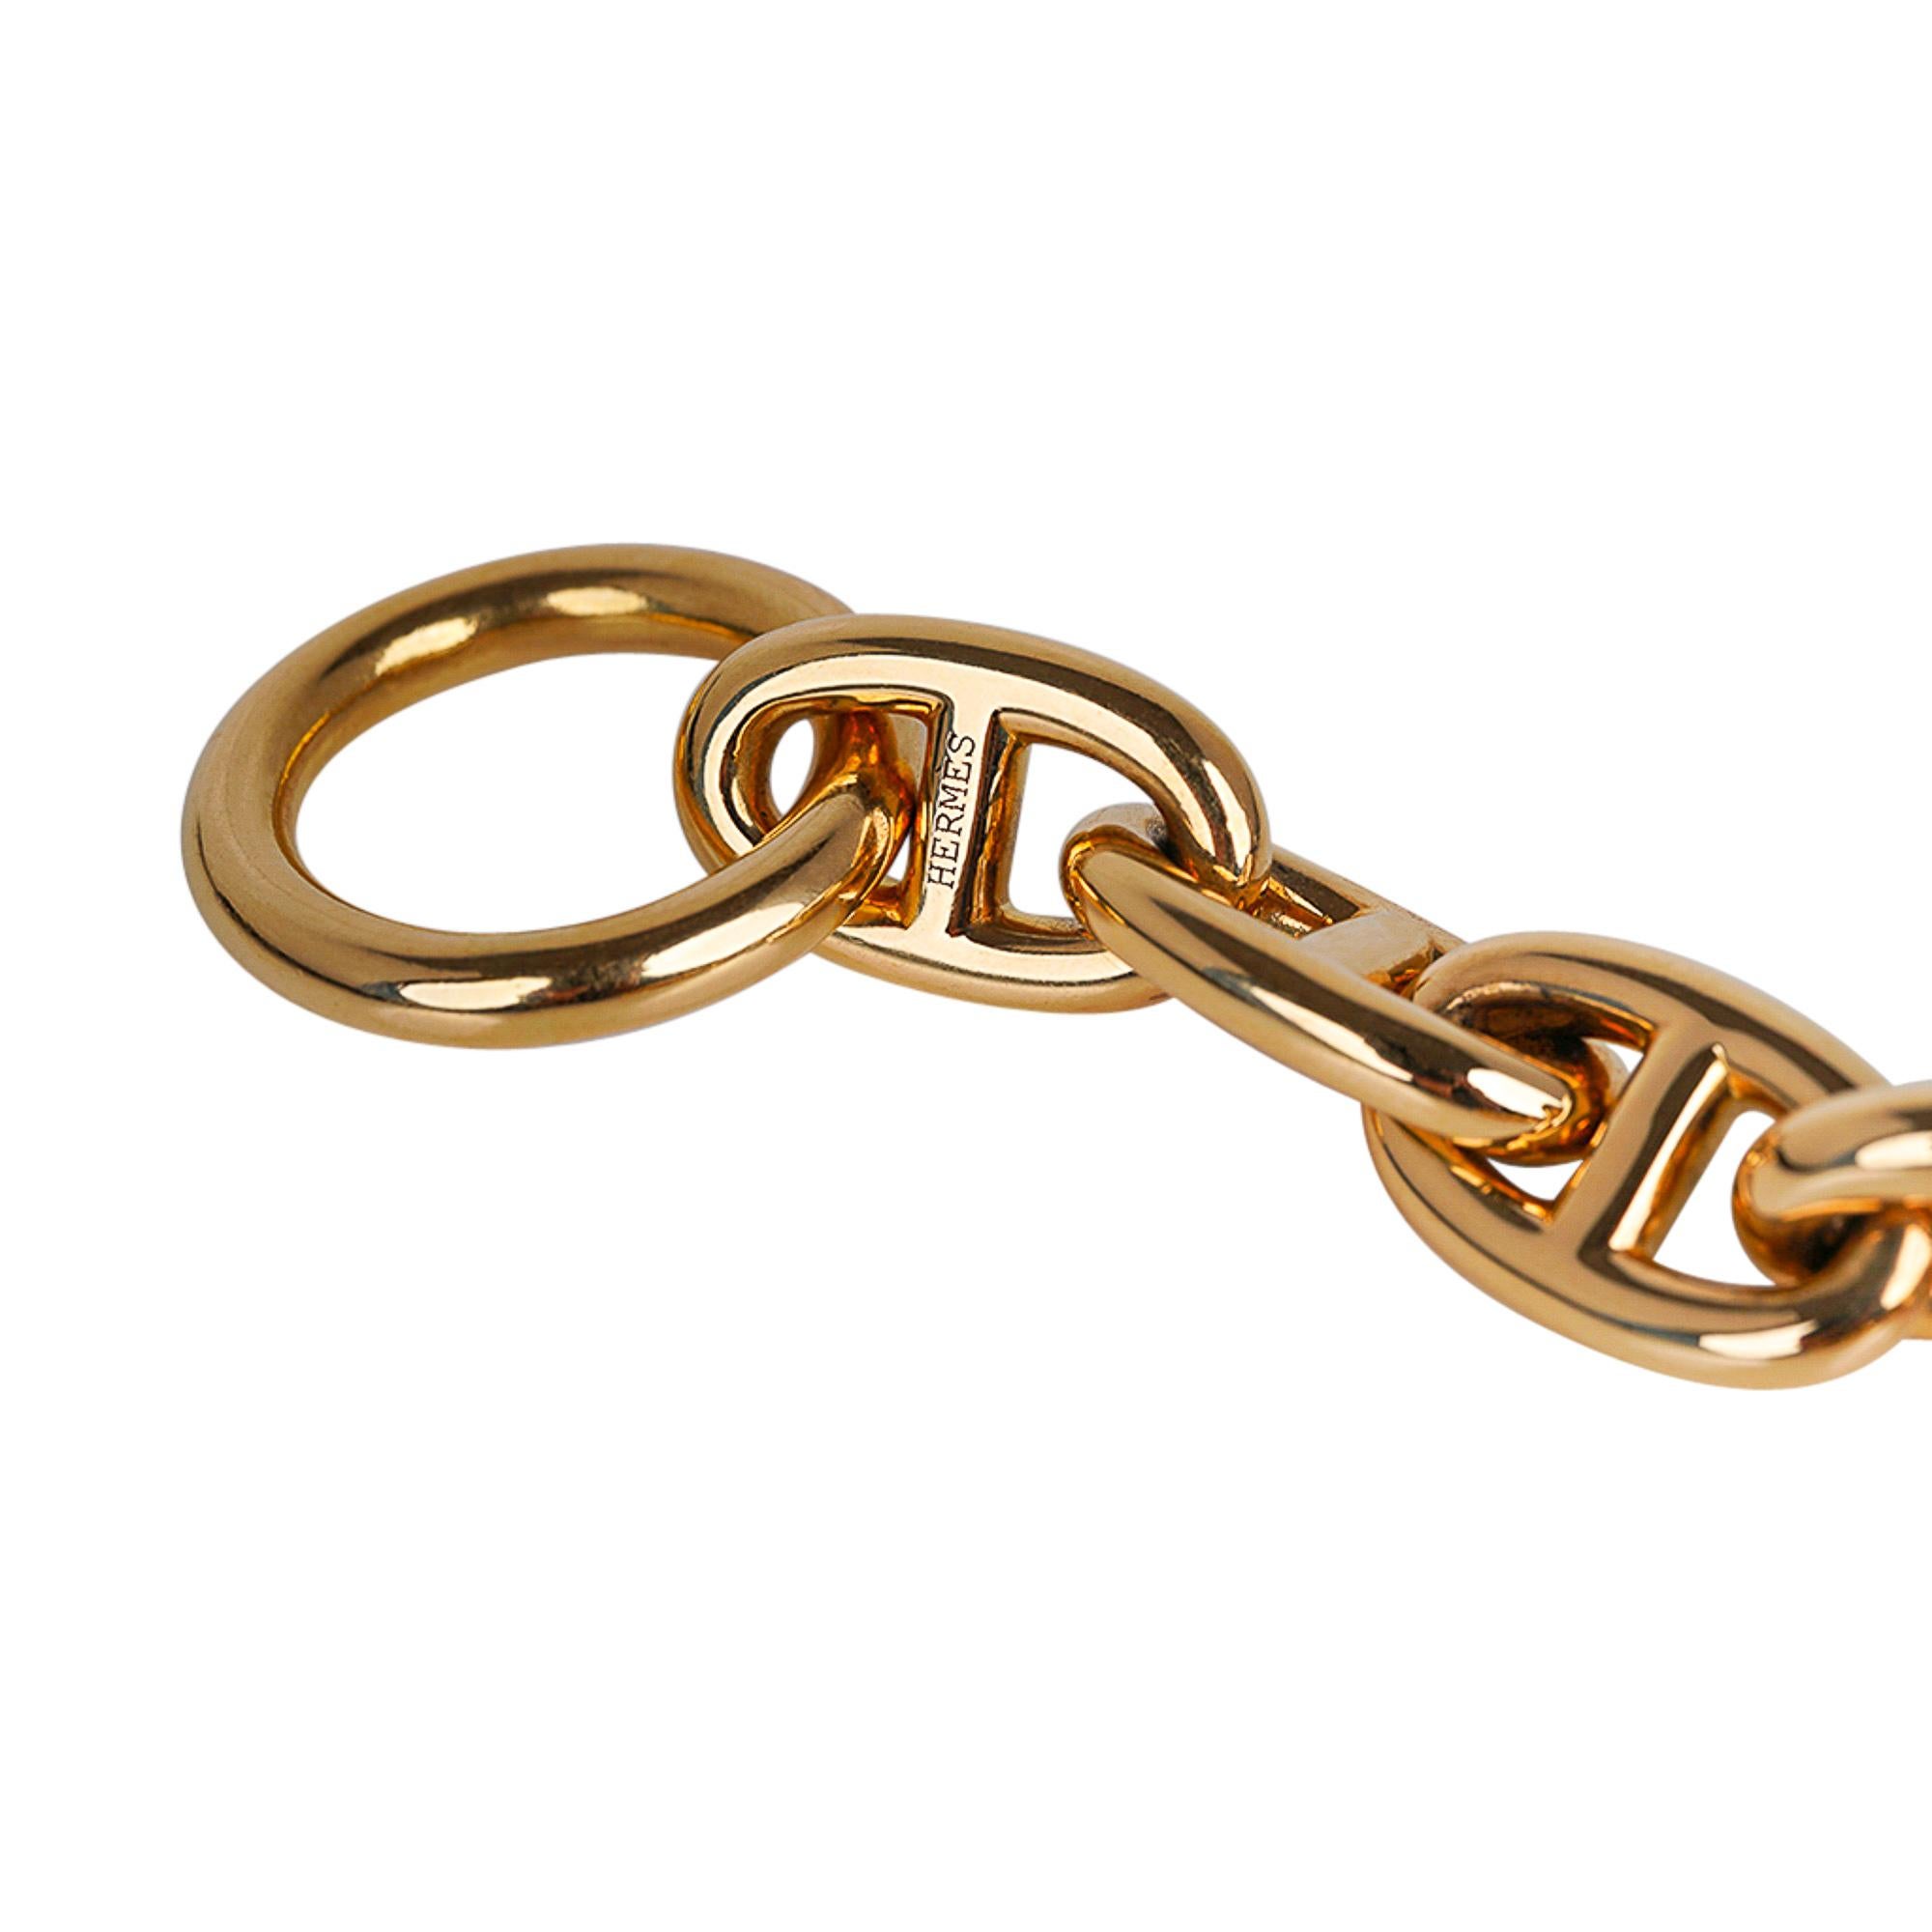 Hermes Chaine d'Ancre Bracelet Medium Model 18k Yellow Gold In New Condition For Sale In Miami, FL